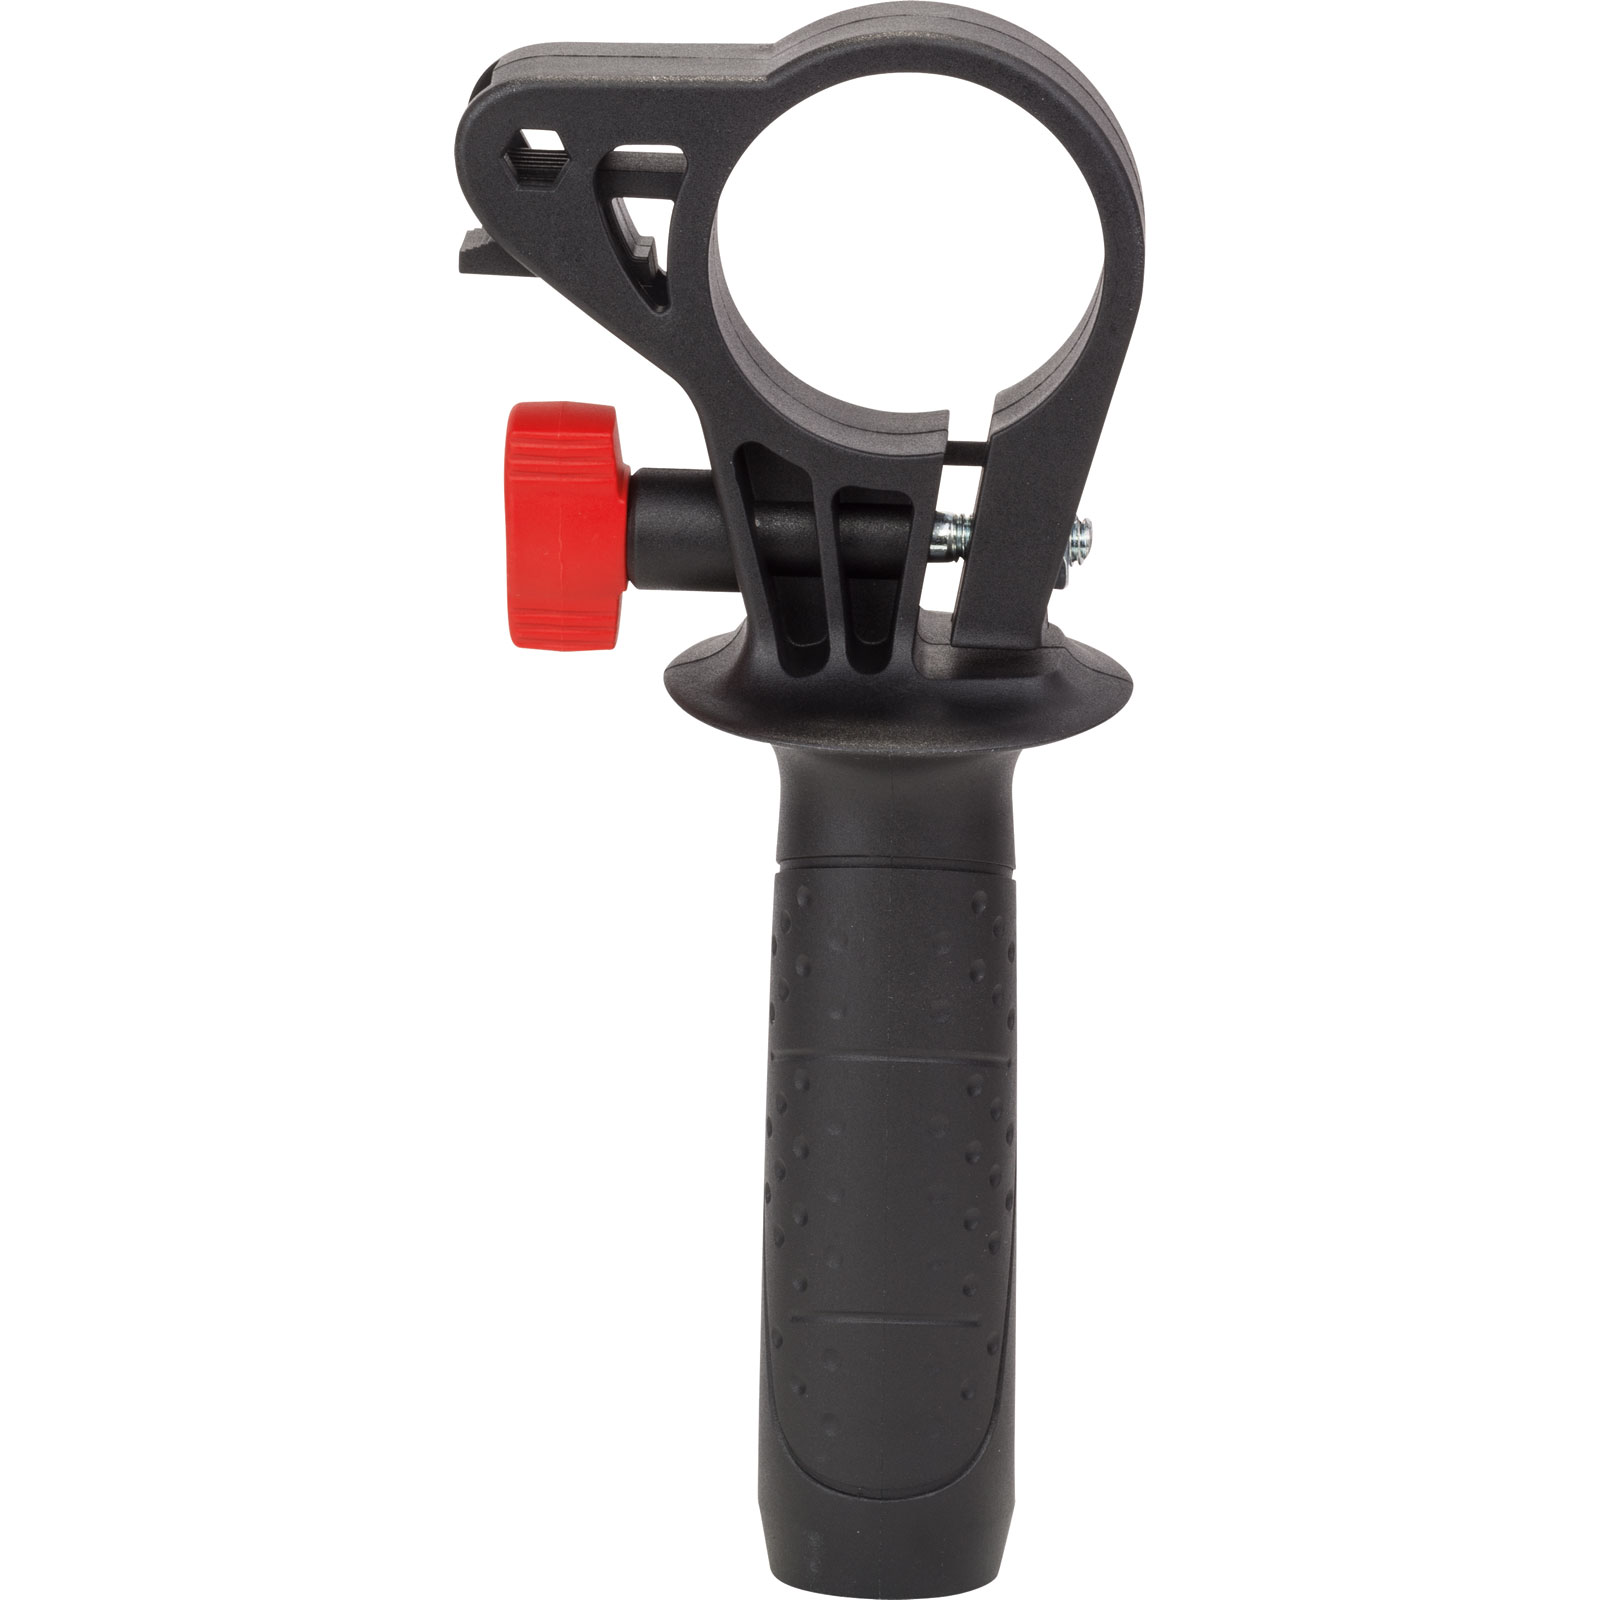 Bosch Auxiliary Handle for PSB 500, 650 and 750 Hammer Drills